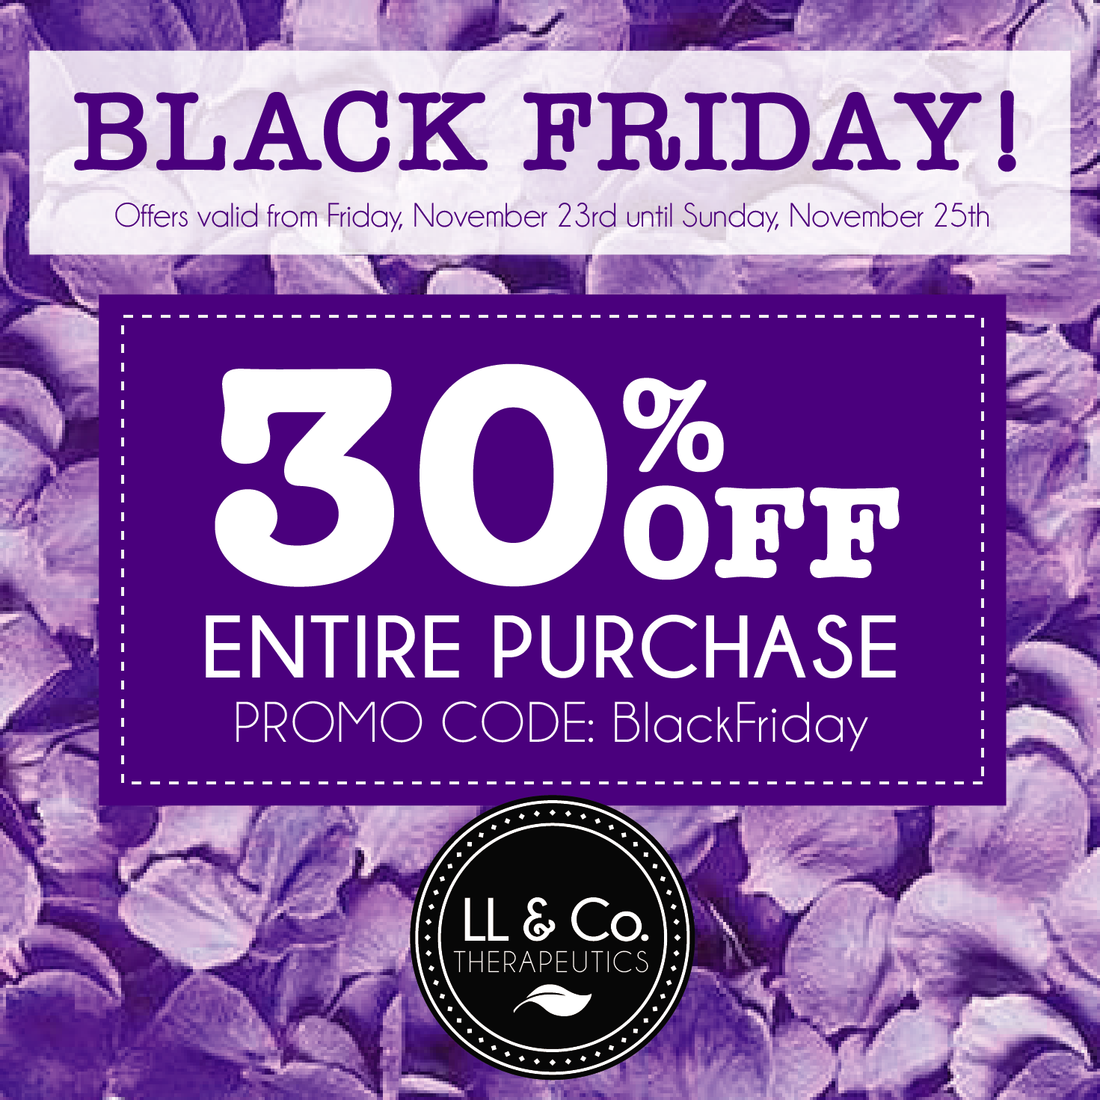 Amazing Black Friday Deal - 30% off Entire Purchase!!